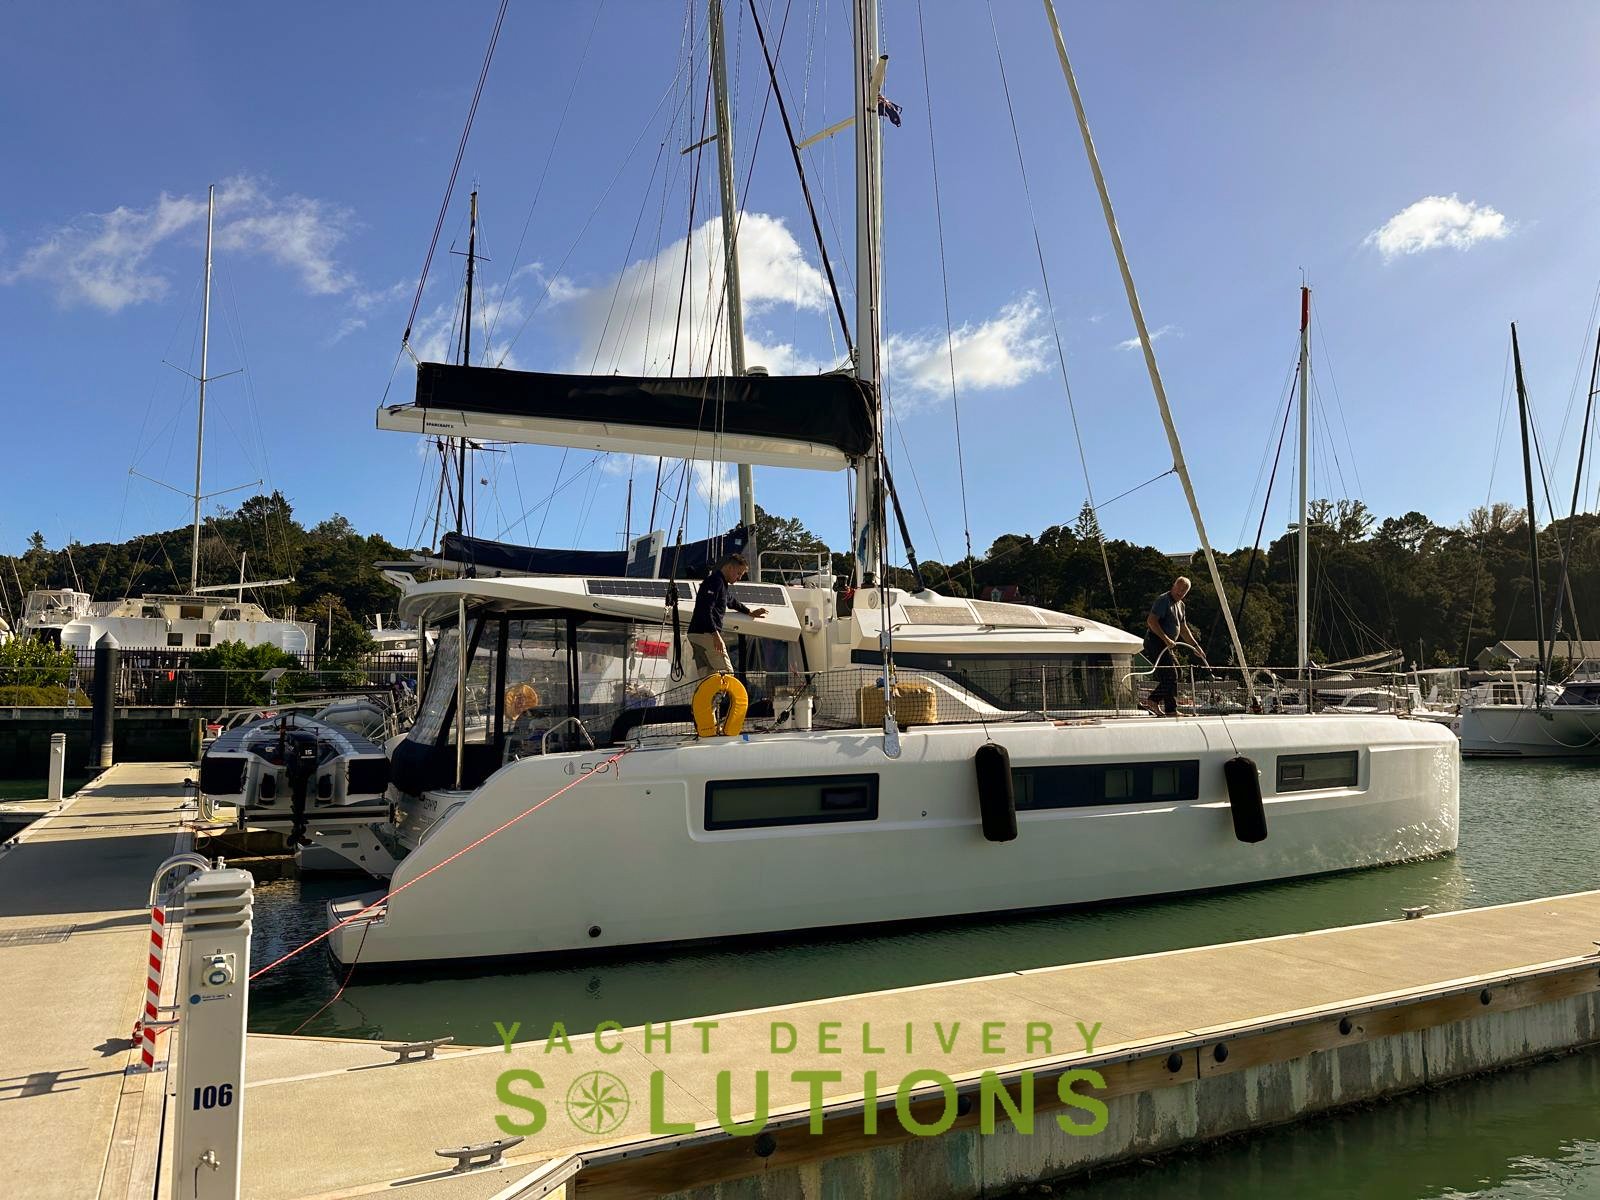 Lagoon 50 yacht delivery solutions from Auckland to fiji